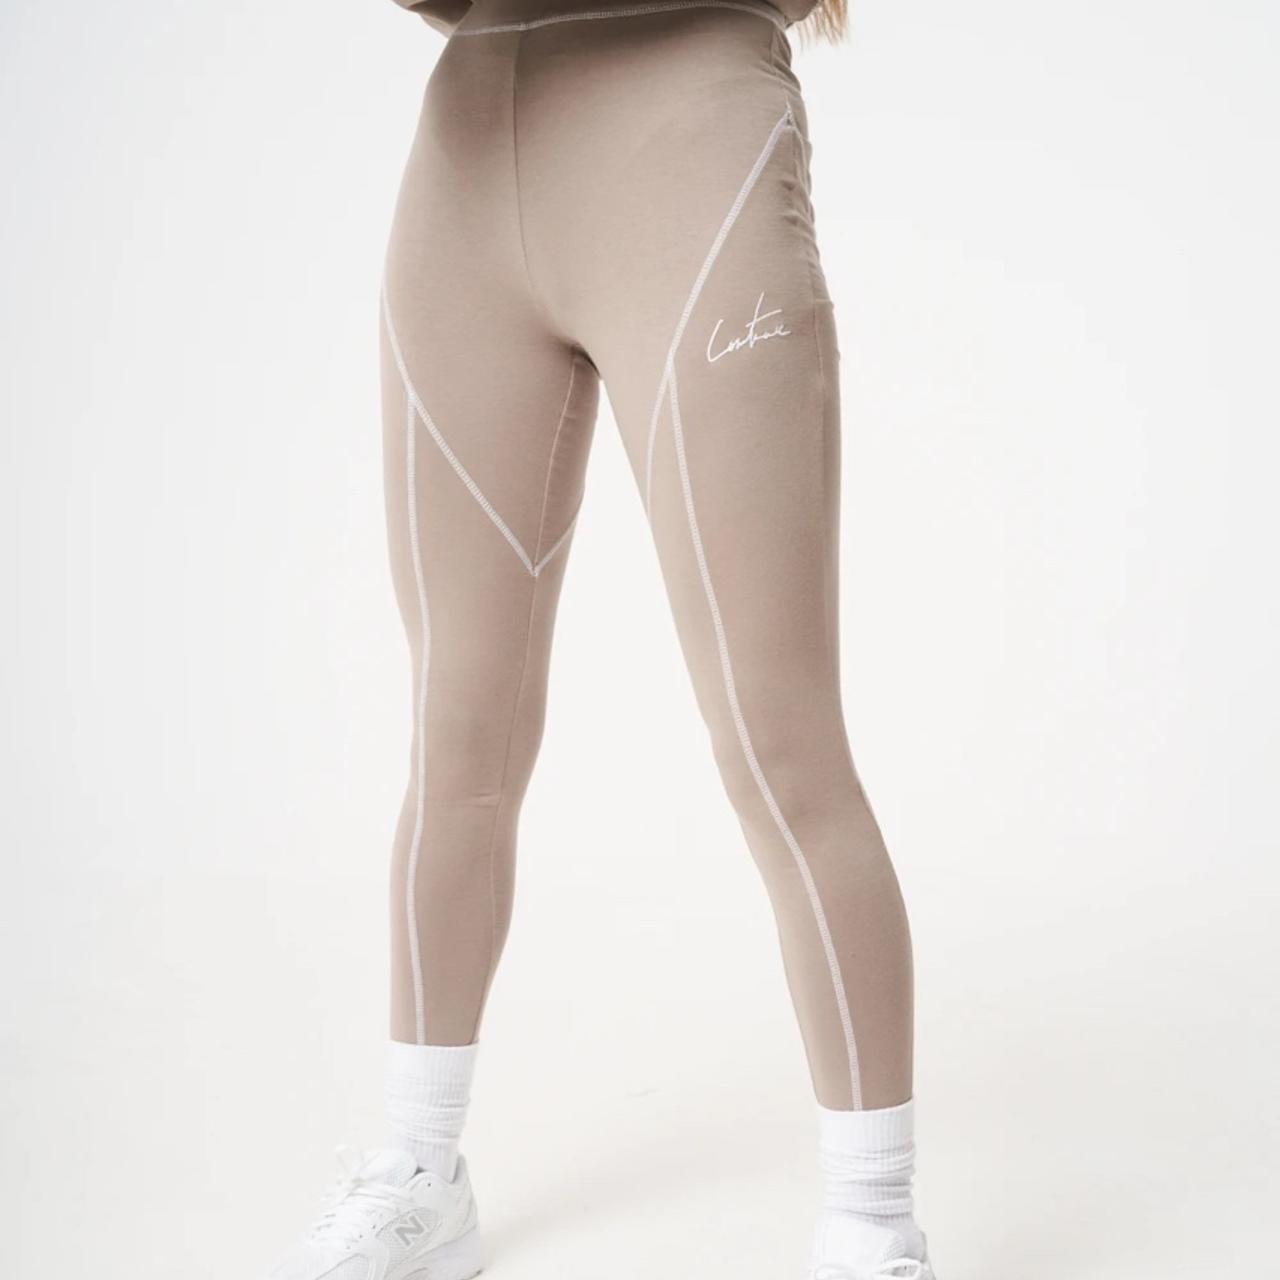 The Couture Club Women's Tan and Pink Leggings